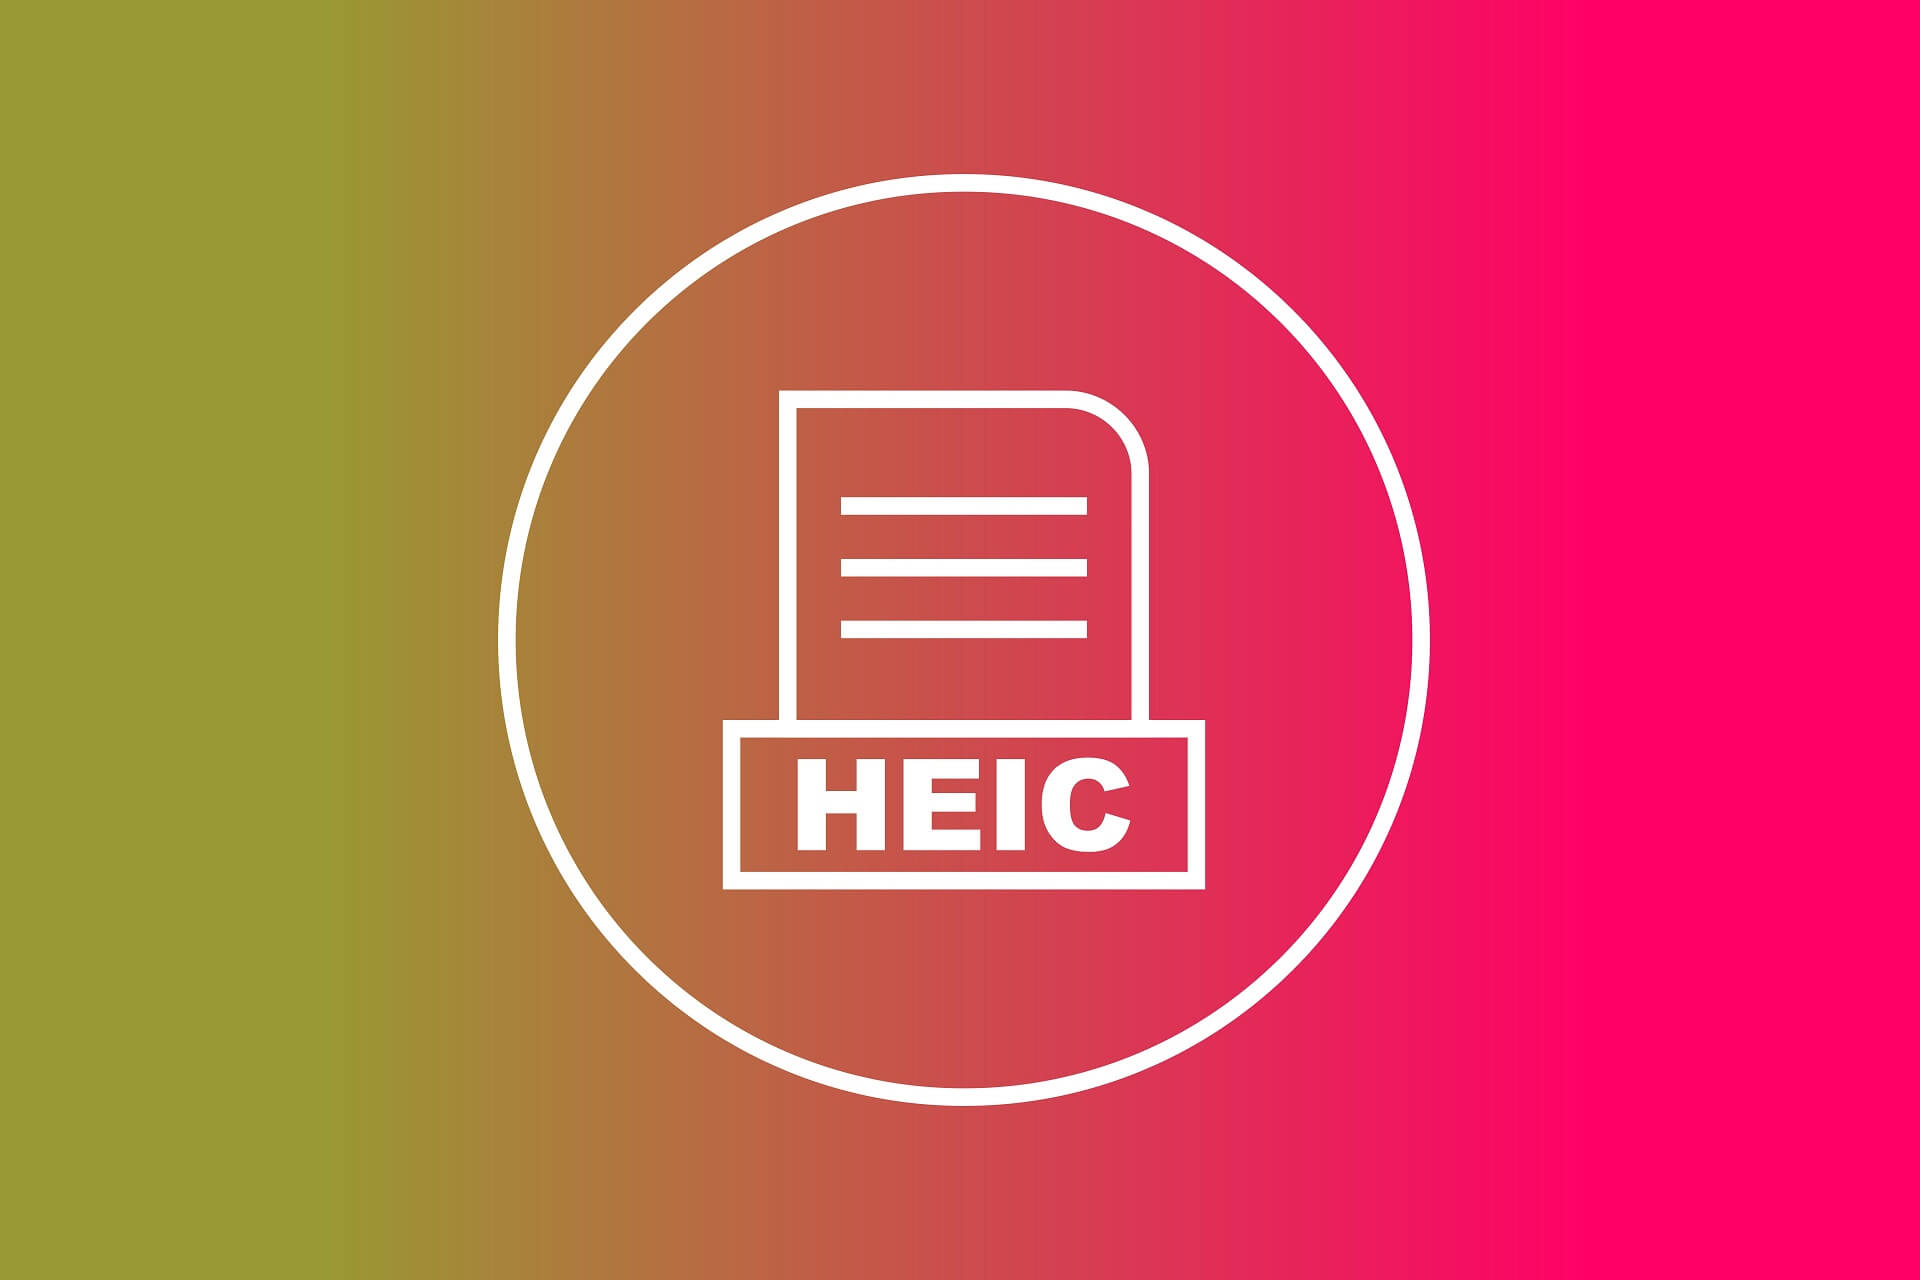 Any HEIC Converter 1.0.13 download